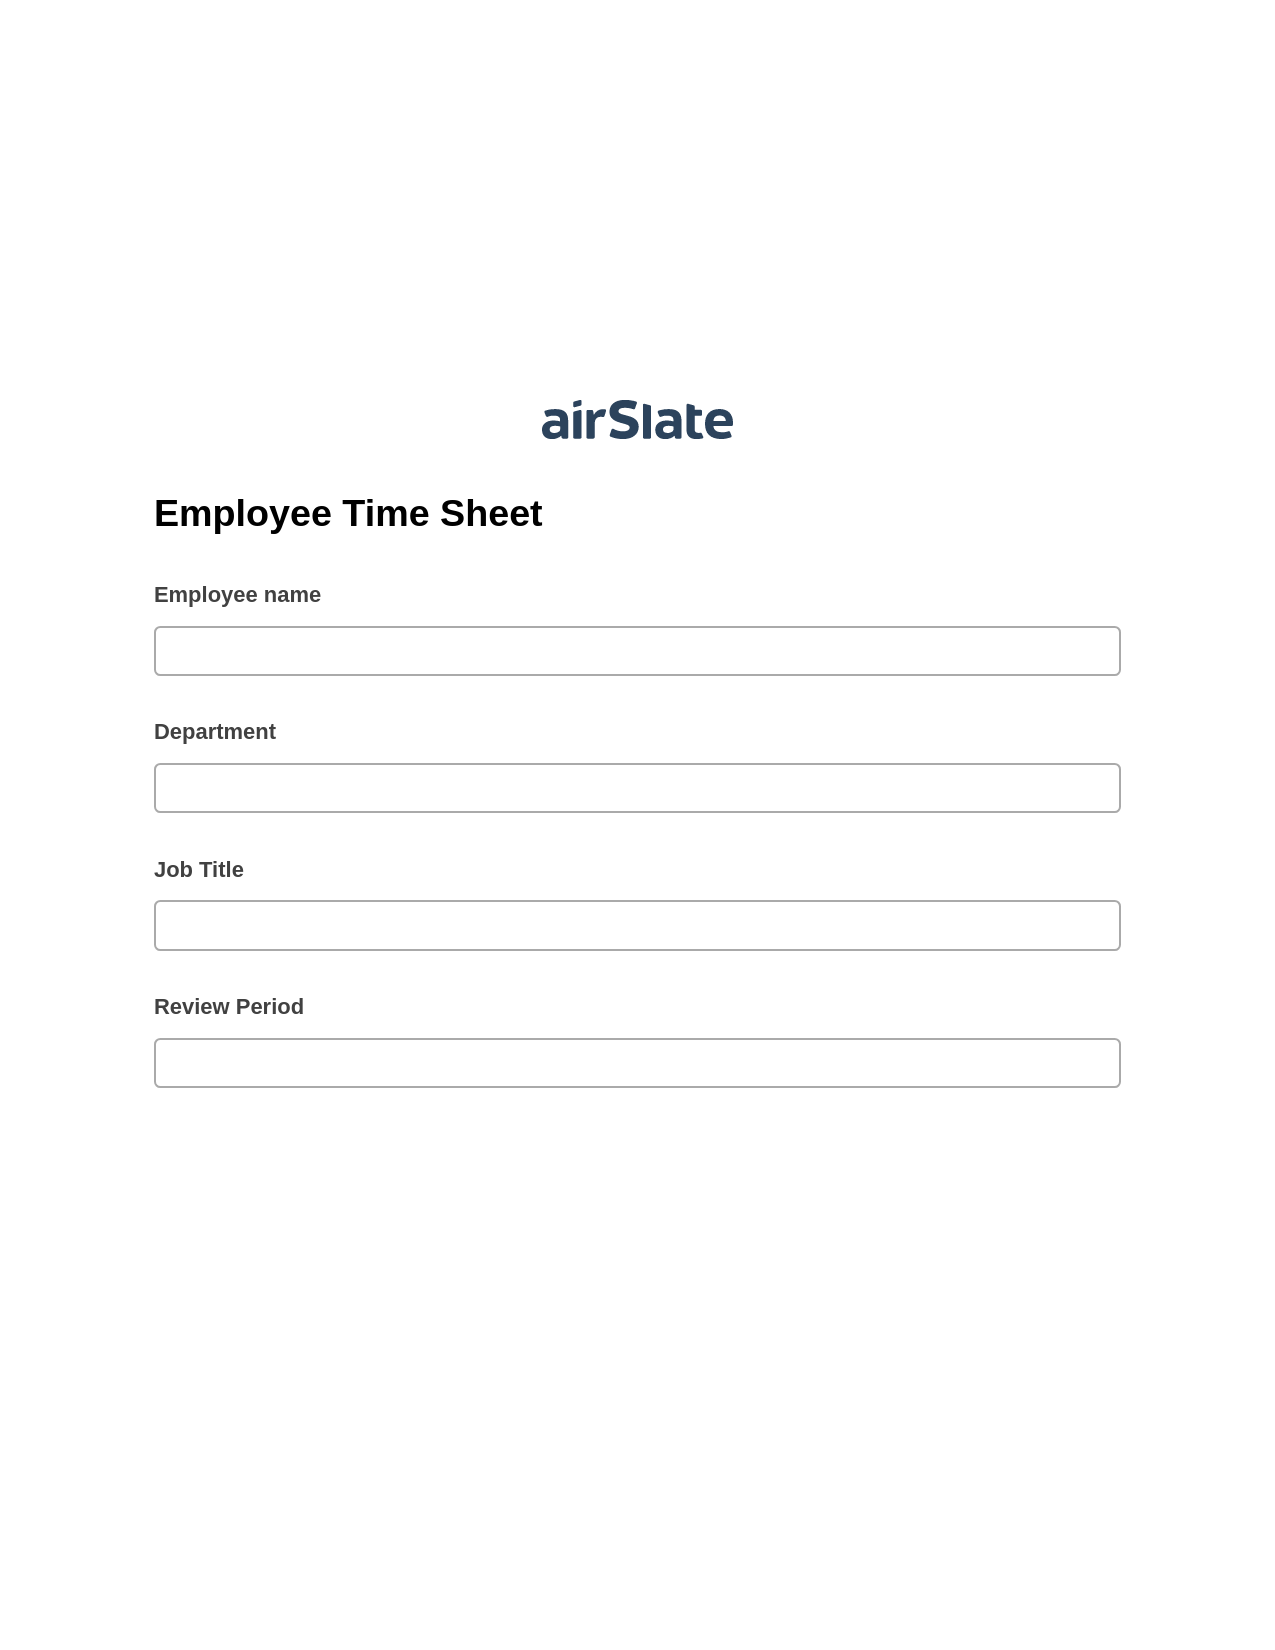 Employee Time Sheet Pre-fill from Excel Spreadsheet Bot, Custom Field's Value Bot, Export to NetSuite Bot